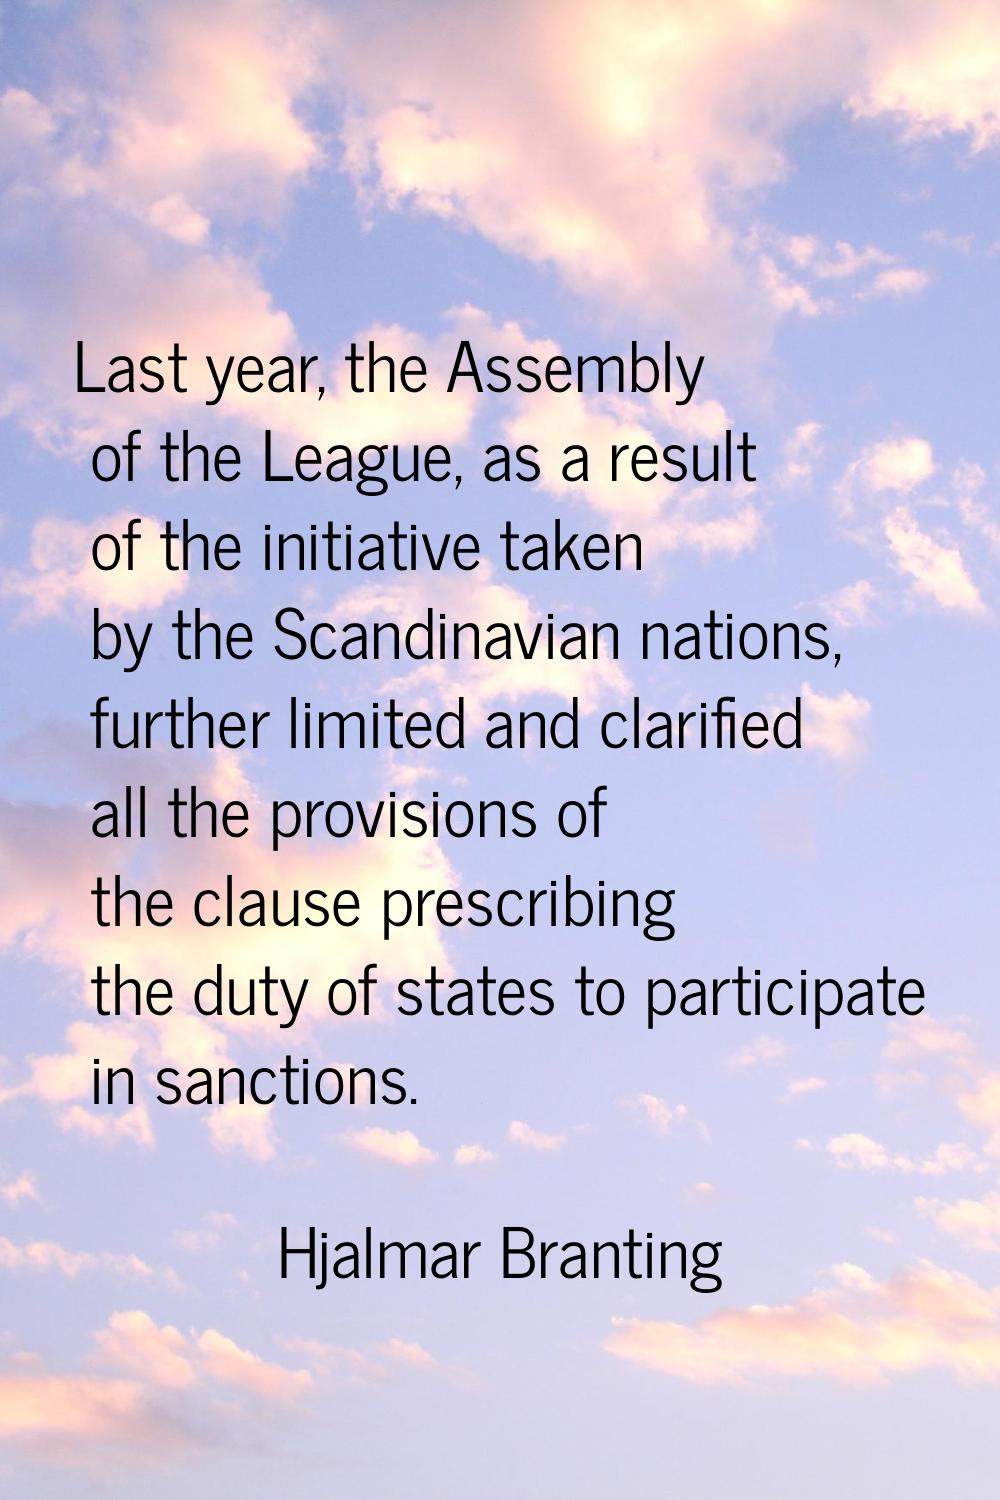 Last year, the Assembly of the League, as a result of the initiative taken by the Scandinavian nati